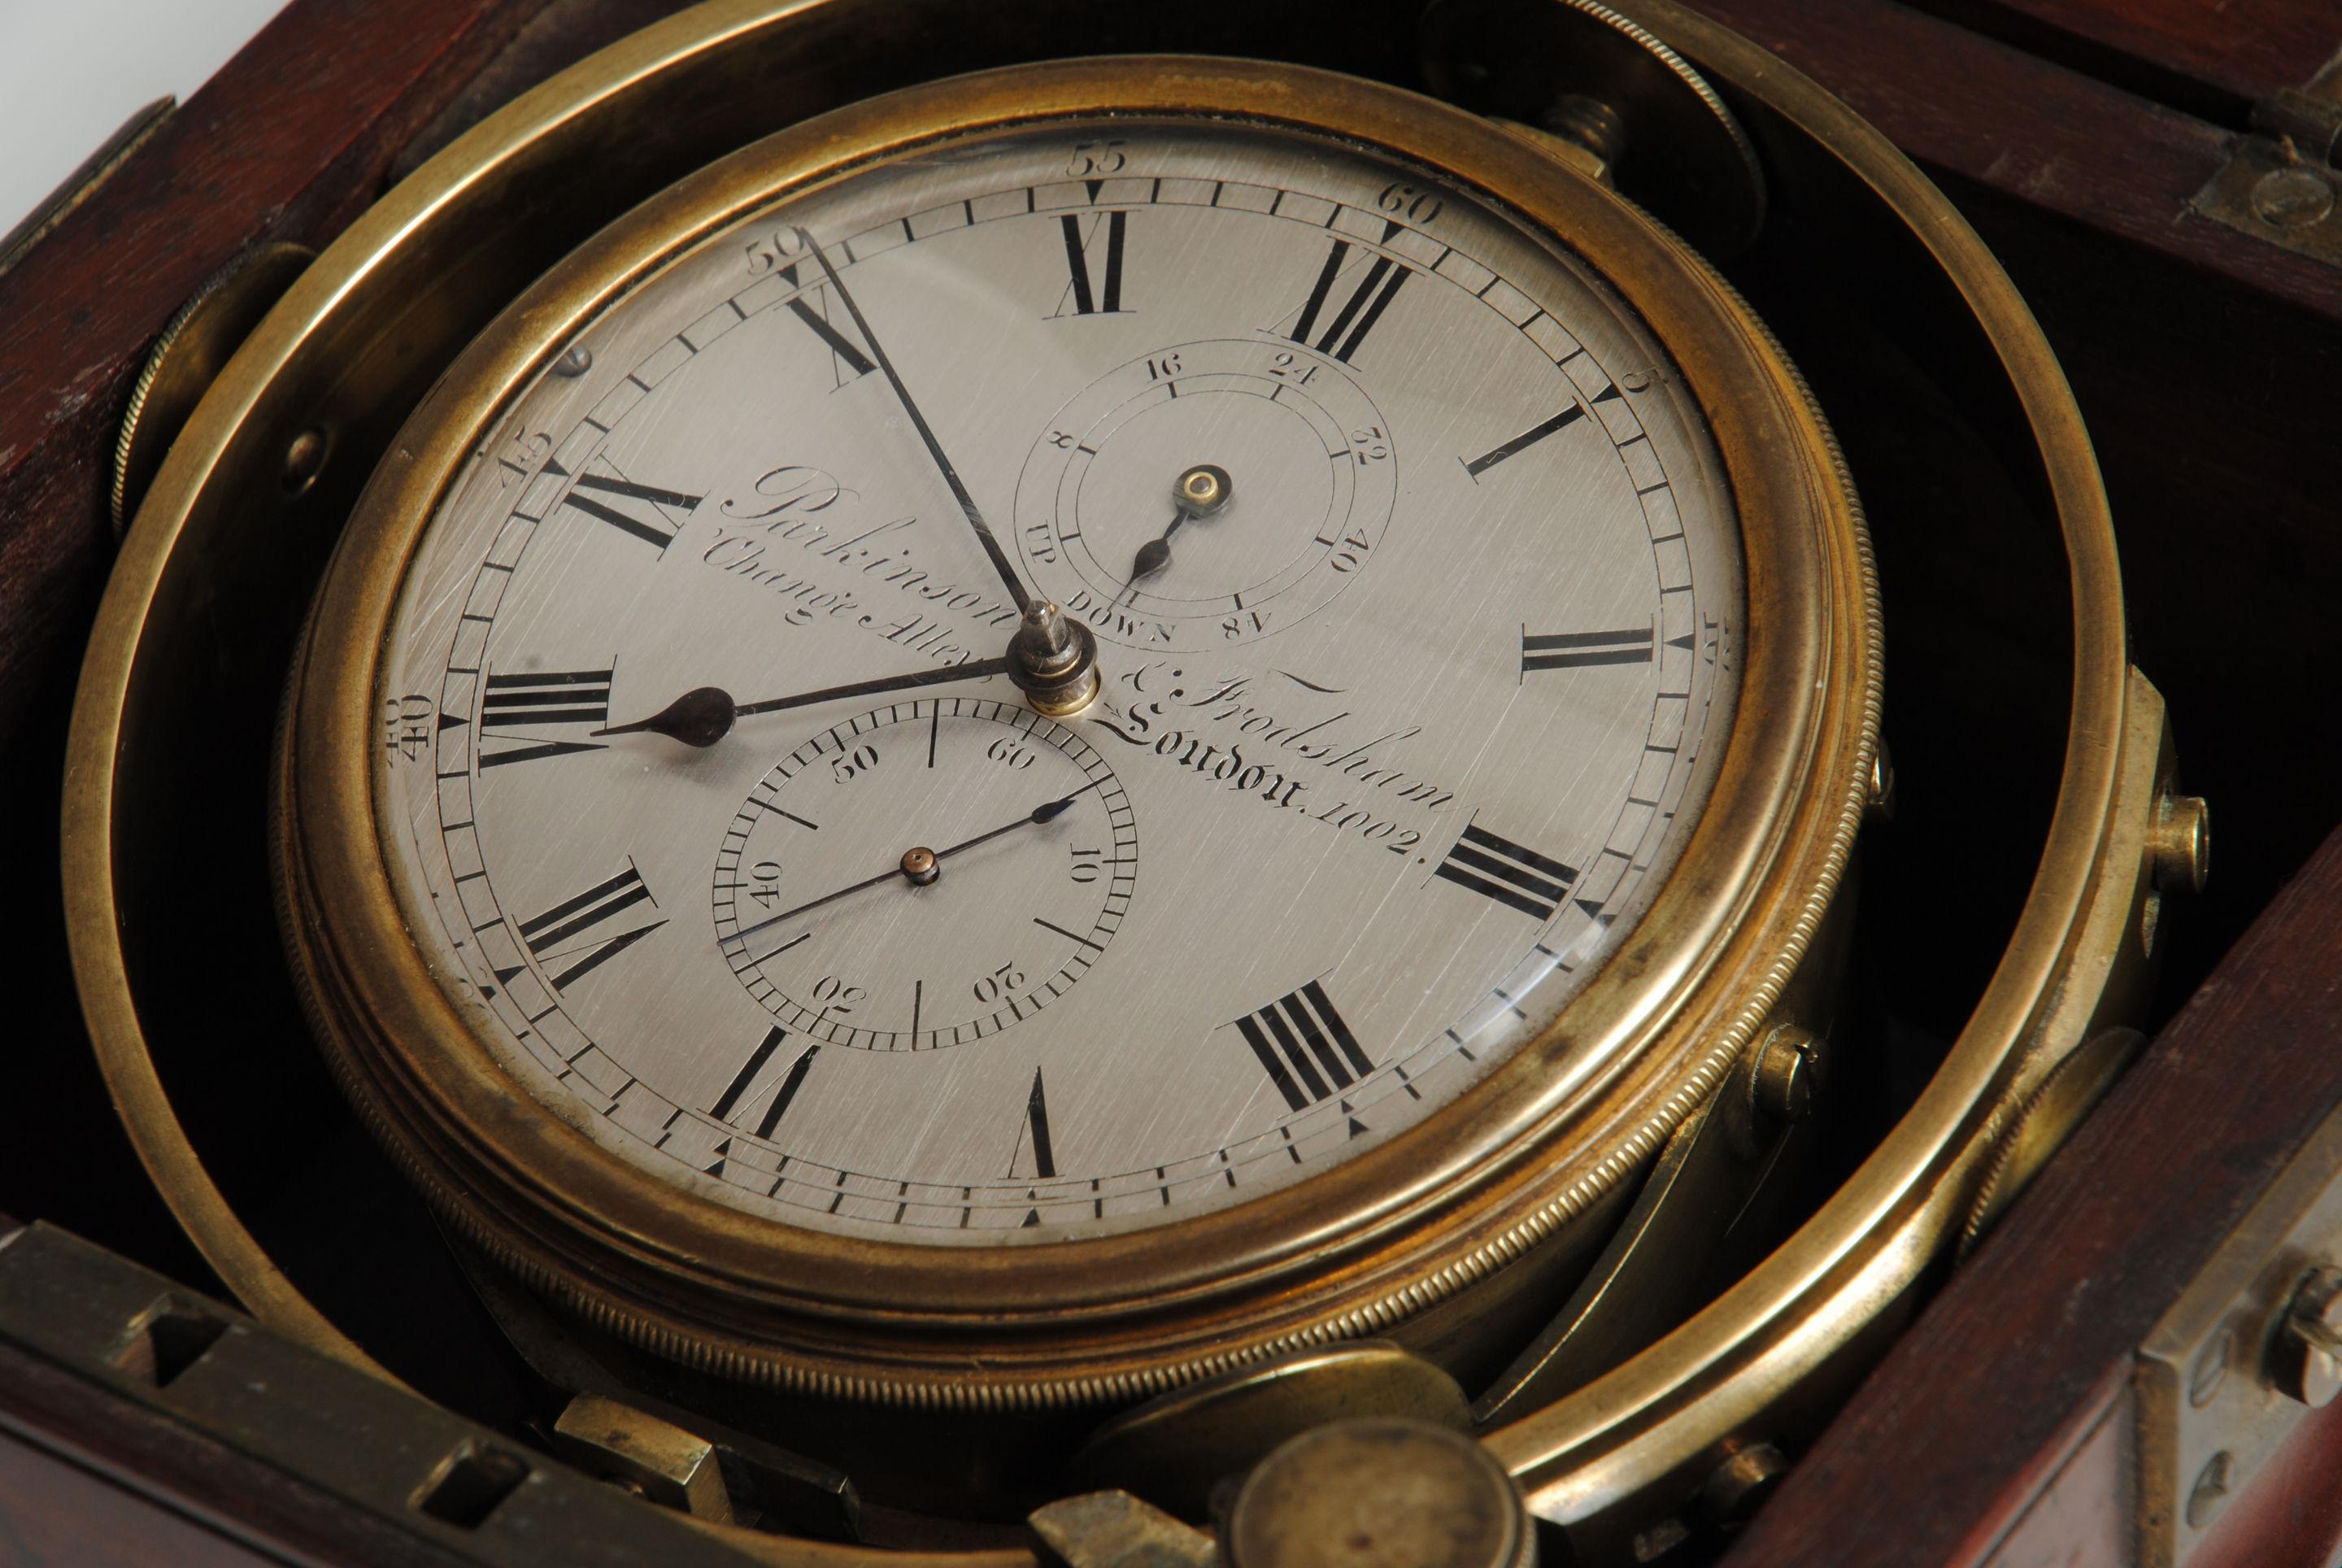 A rare early 19th century two day marine chronometer by Parkinson and Frodsham number 1002 

This chronometer has been in the same family for over 100 years and is in the original mahogany case with numbered plaque and even retains the original